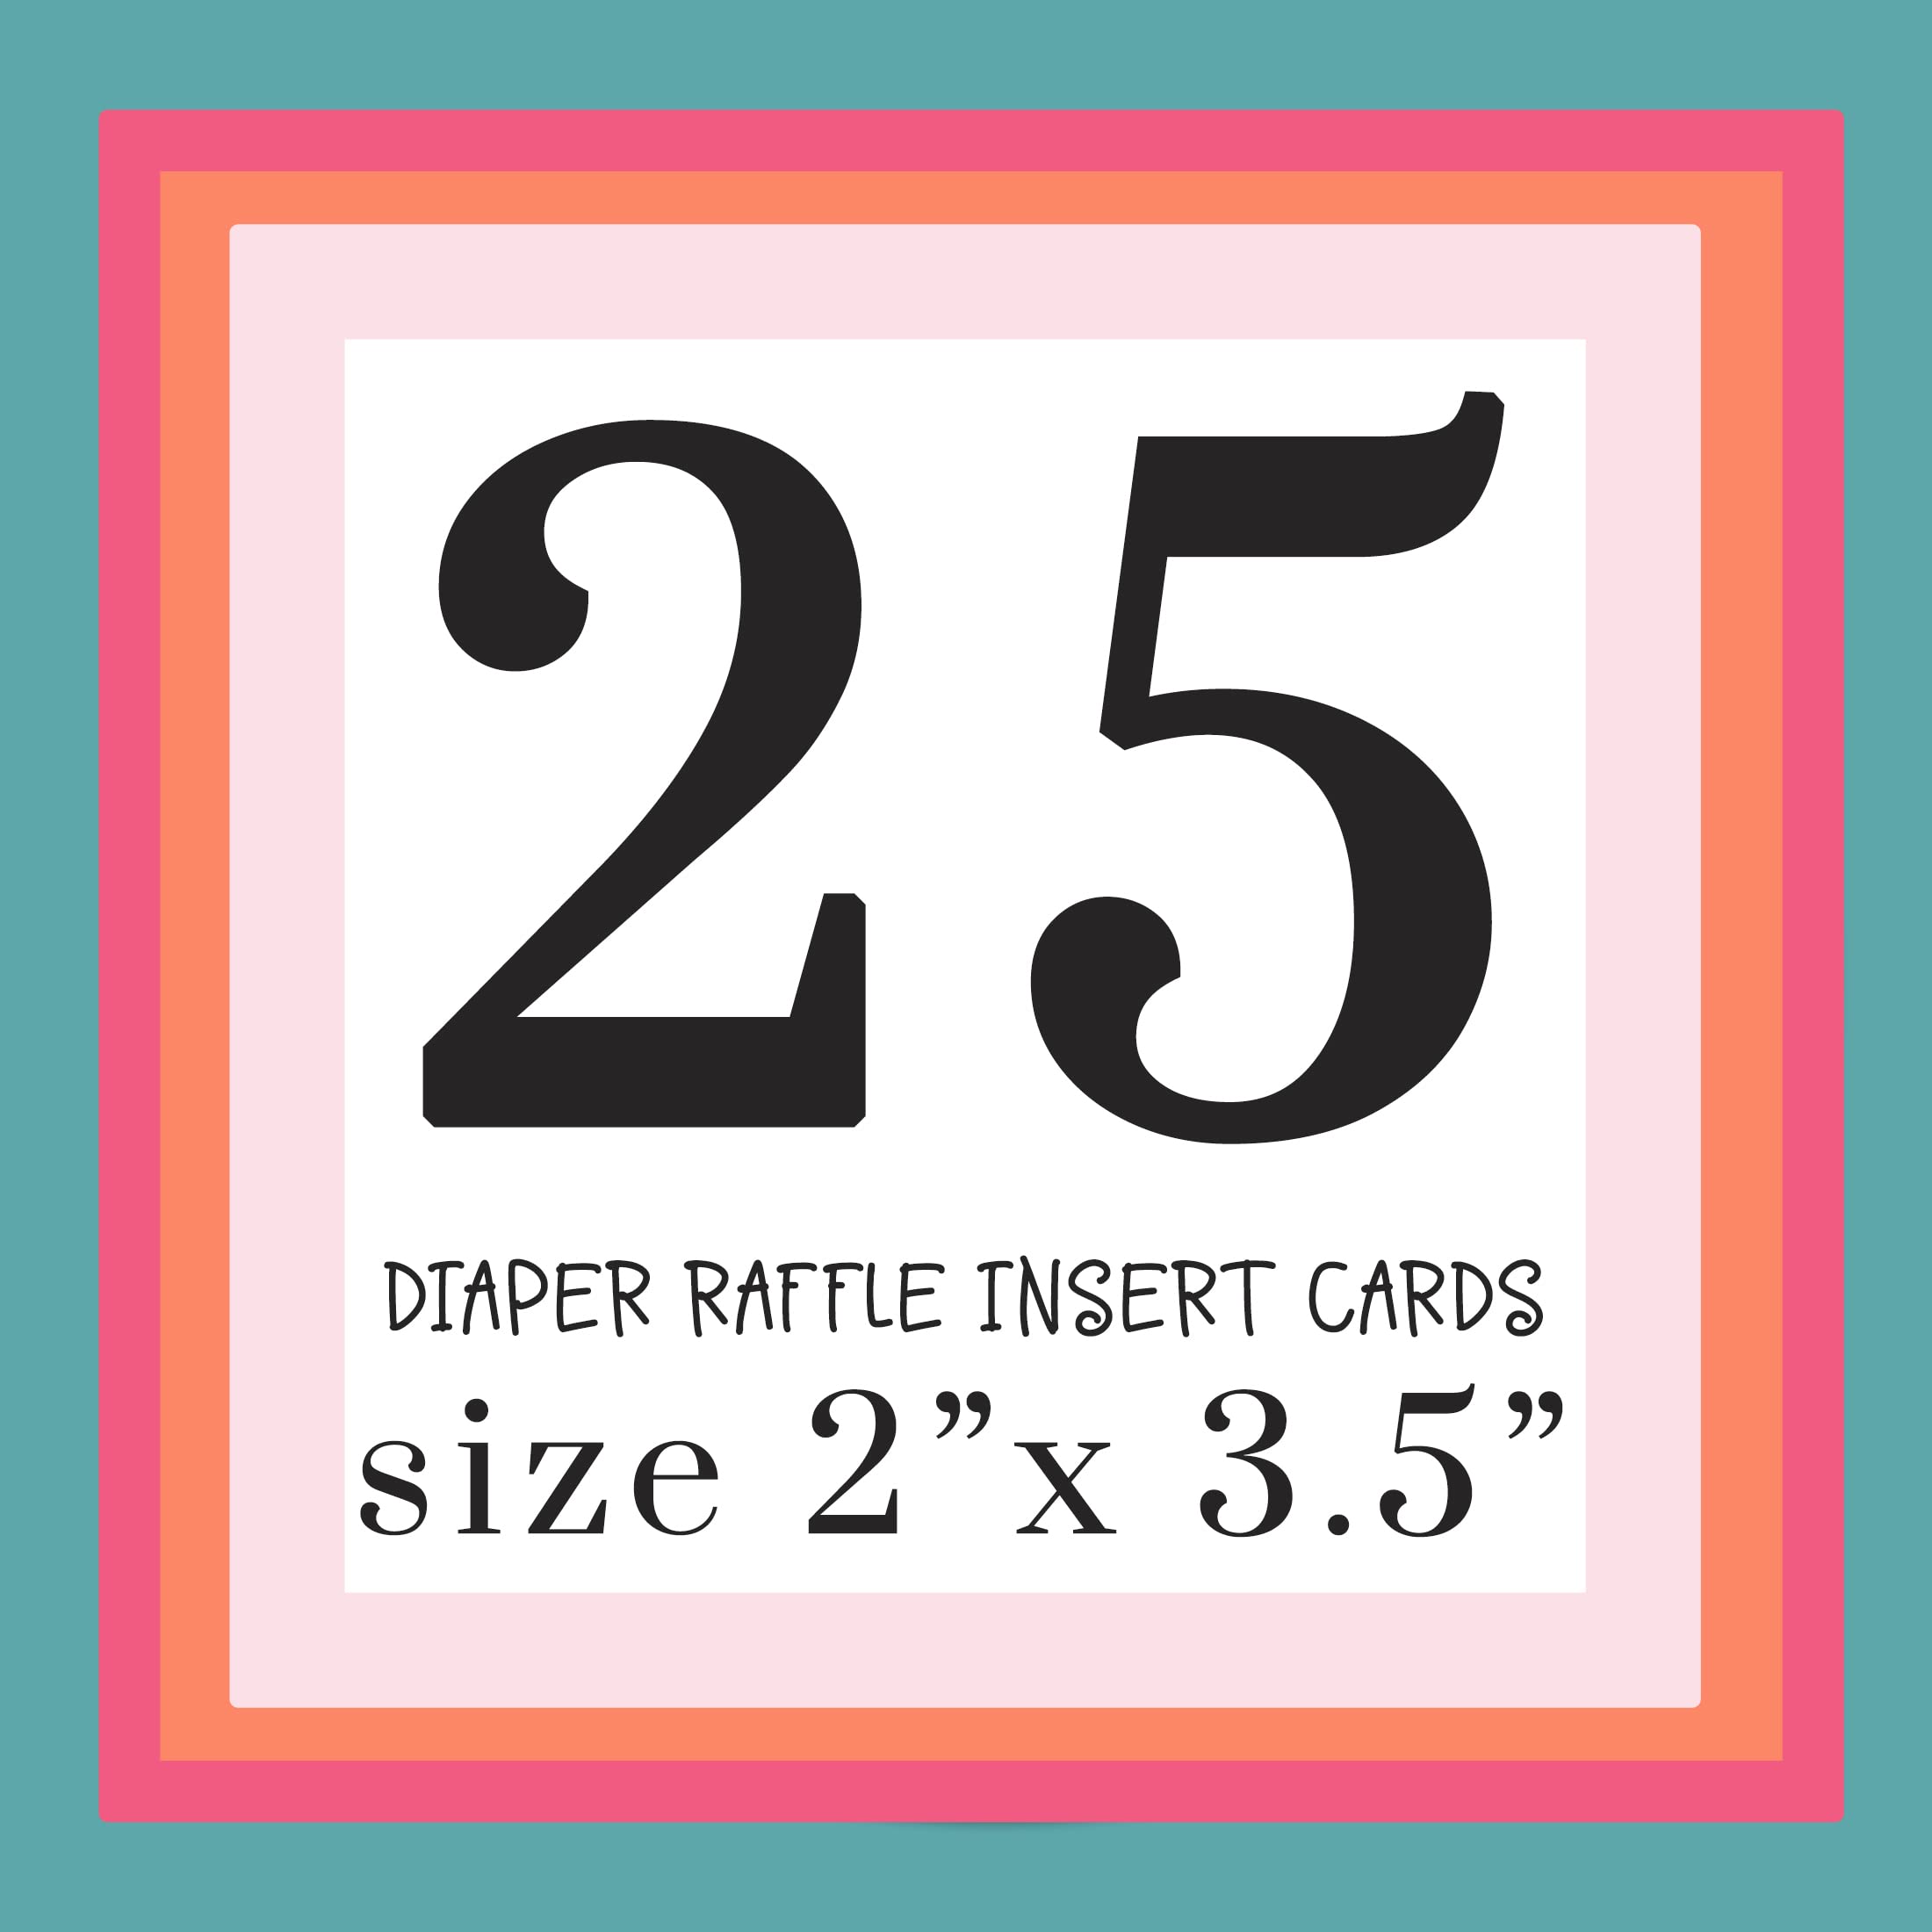 Paper Clever Party Pink and Gold Diaper Raffle Tickets (25 Pack) Girls Baby Shower Prize Drawing Games - Invitation Insert Cards Princess Twinkle Little Star 2x3.5 Set